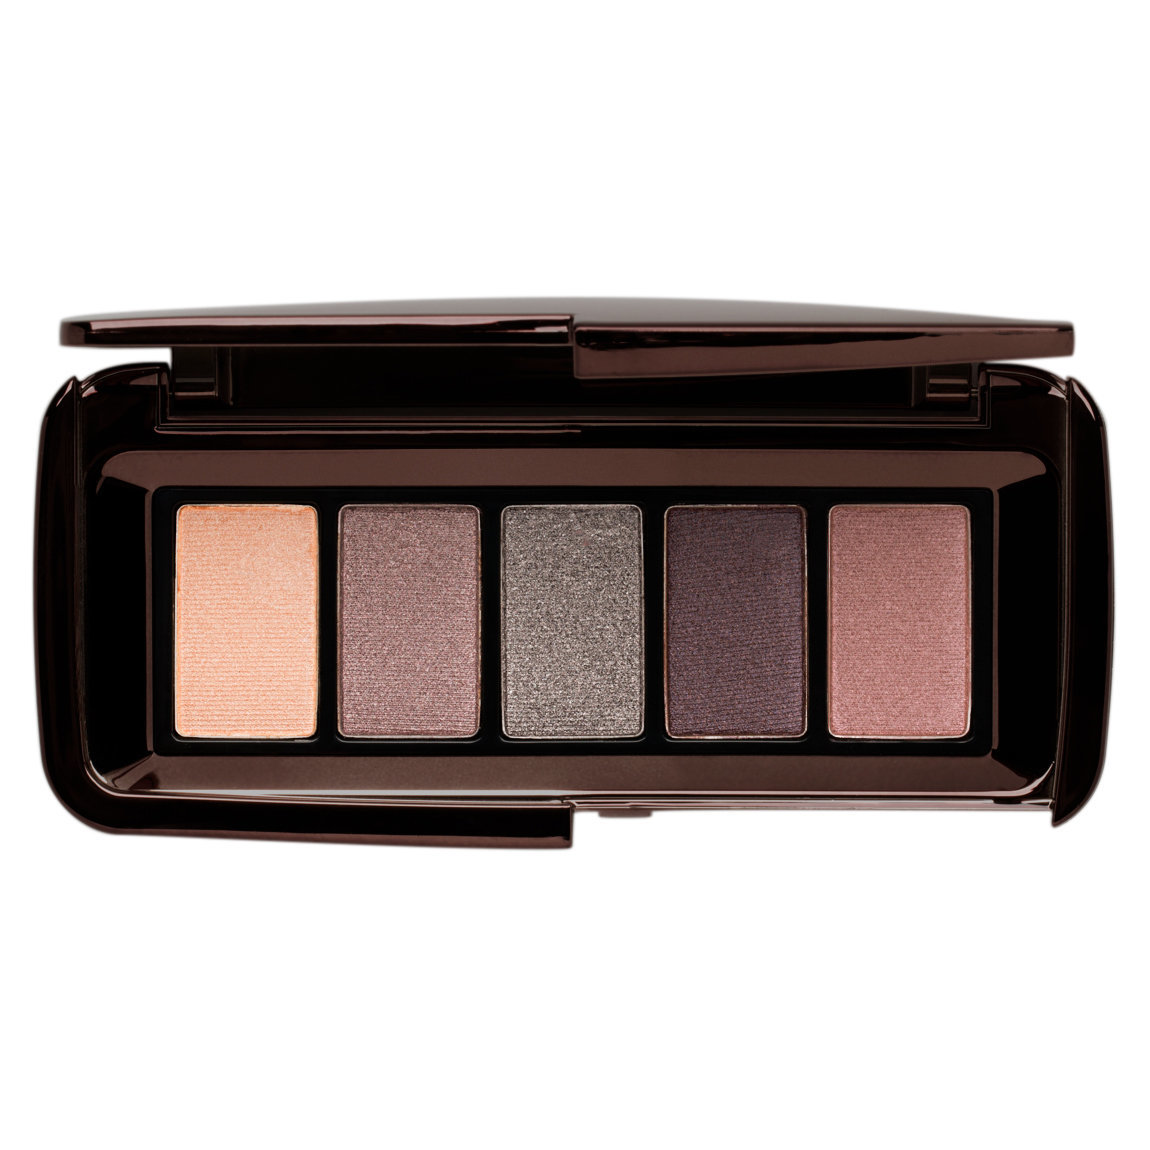 Hourglass Graphik Eyeshadow Palette Expose alternative view 1 - product swatch.